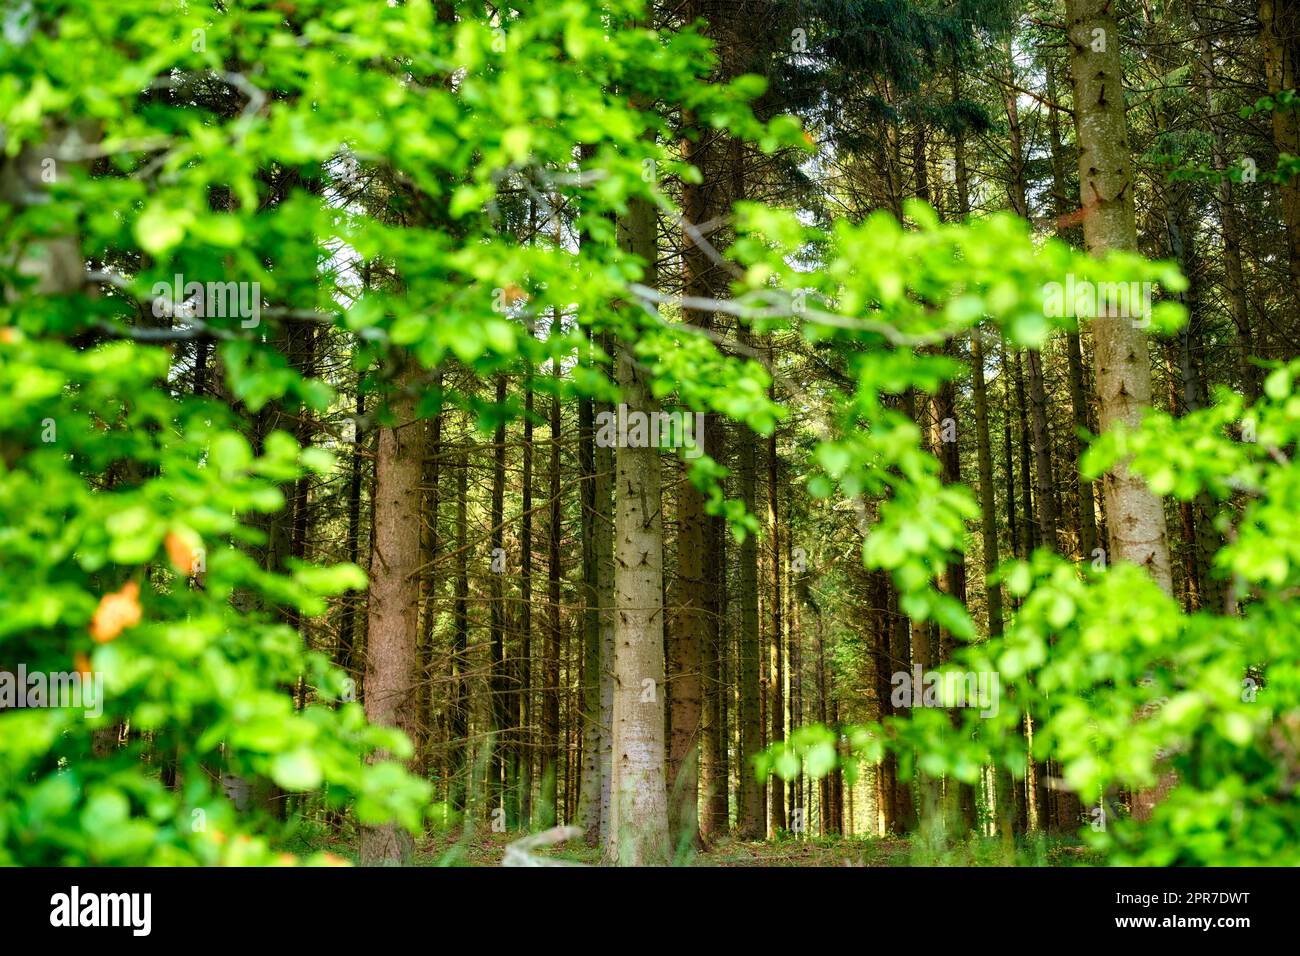 Wild trees growing in a forest with green plants and bushes. Scenic landscape of tall wooden trunks with lush leaves in nature during spring. Peaceful and beautiful views in the park, woods or jungle Stock Photo